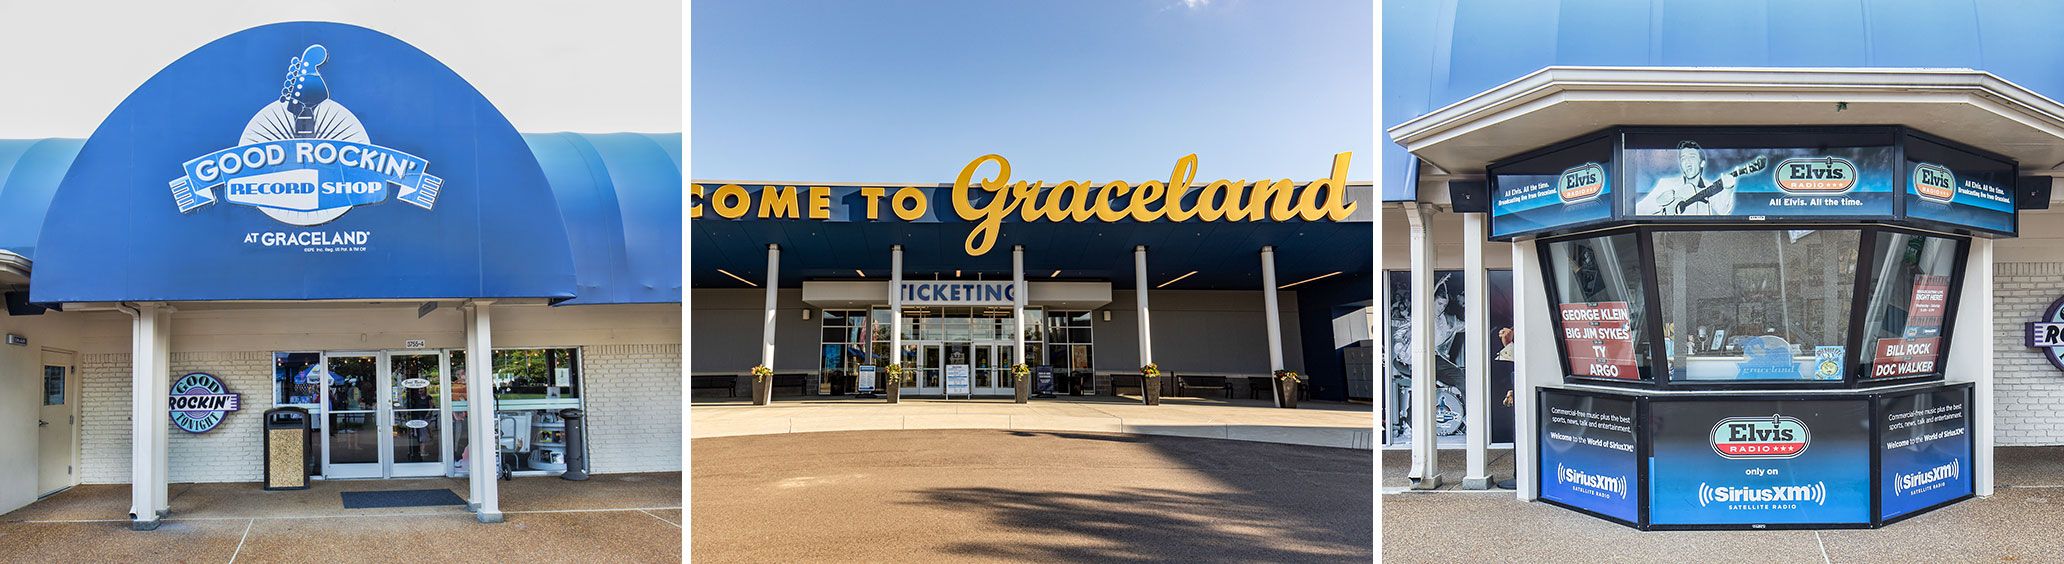 Graceland Plaza and Graceland Crossing Shopping Centers